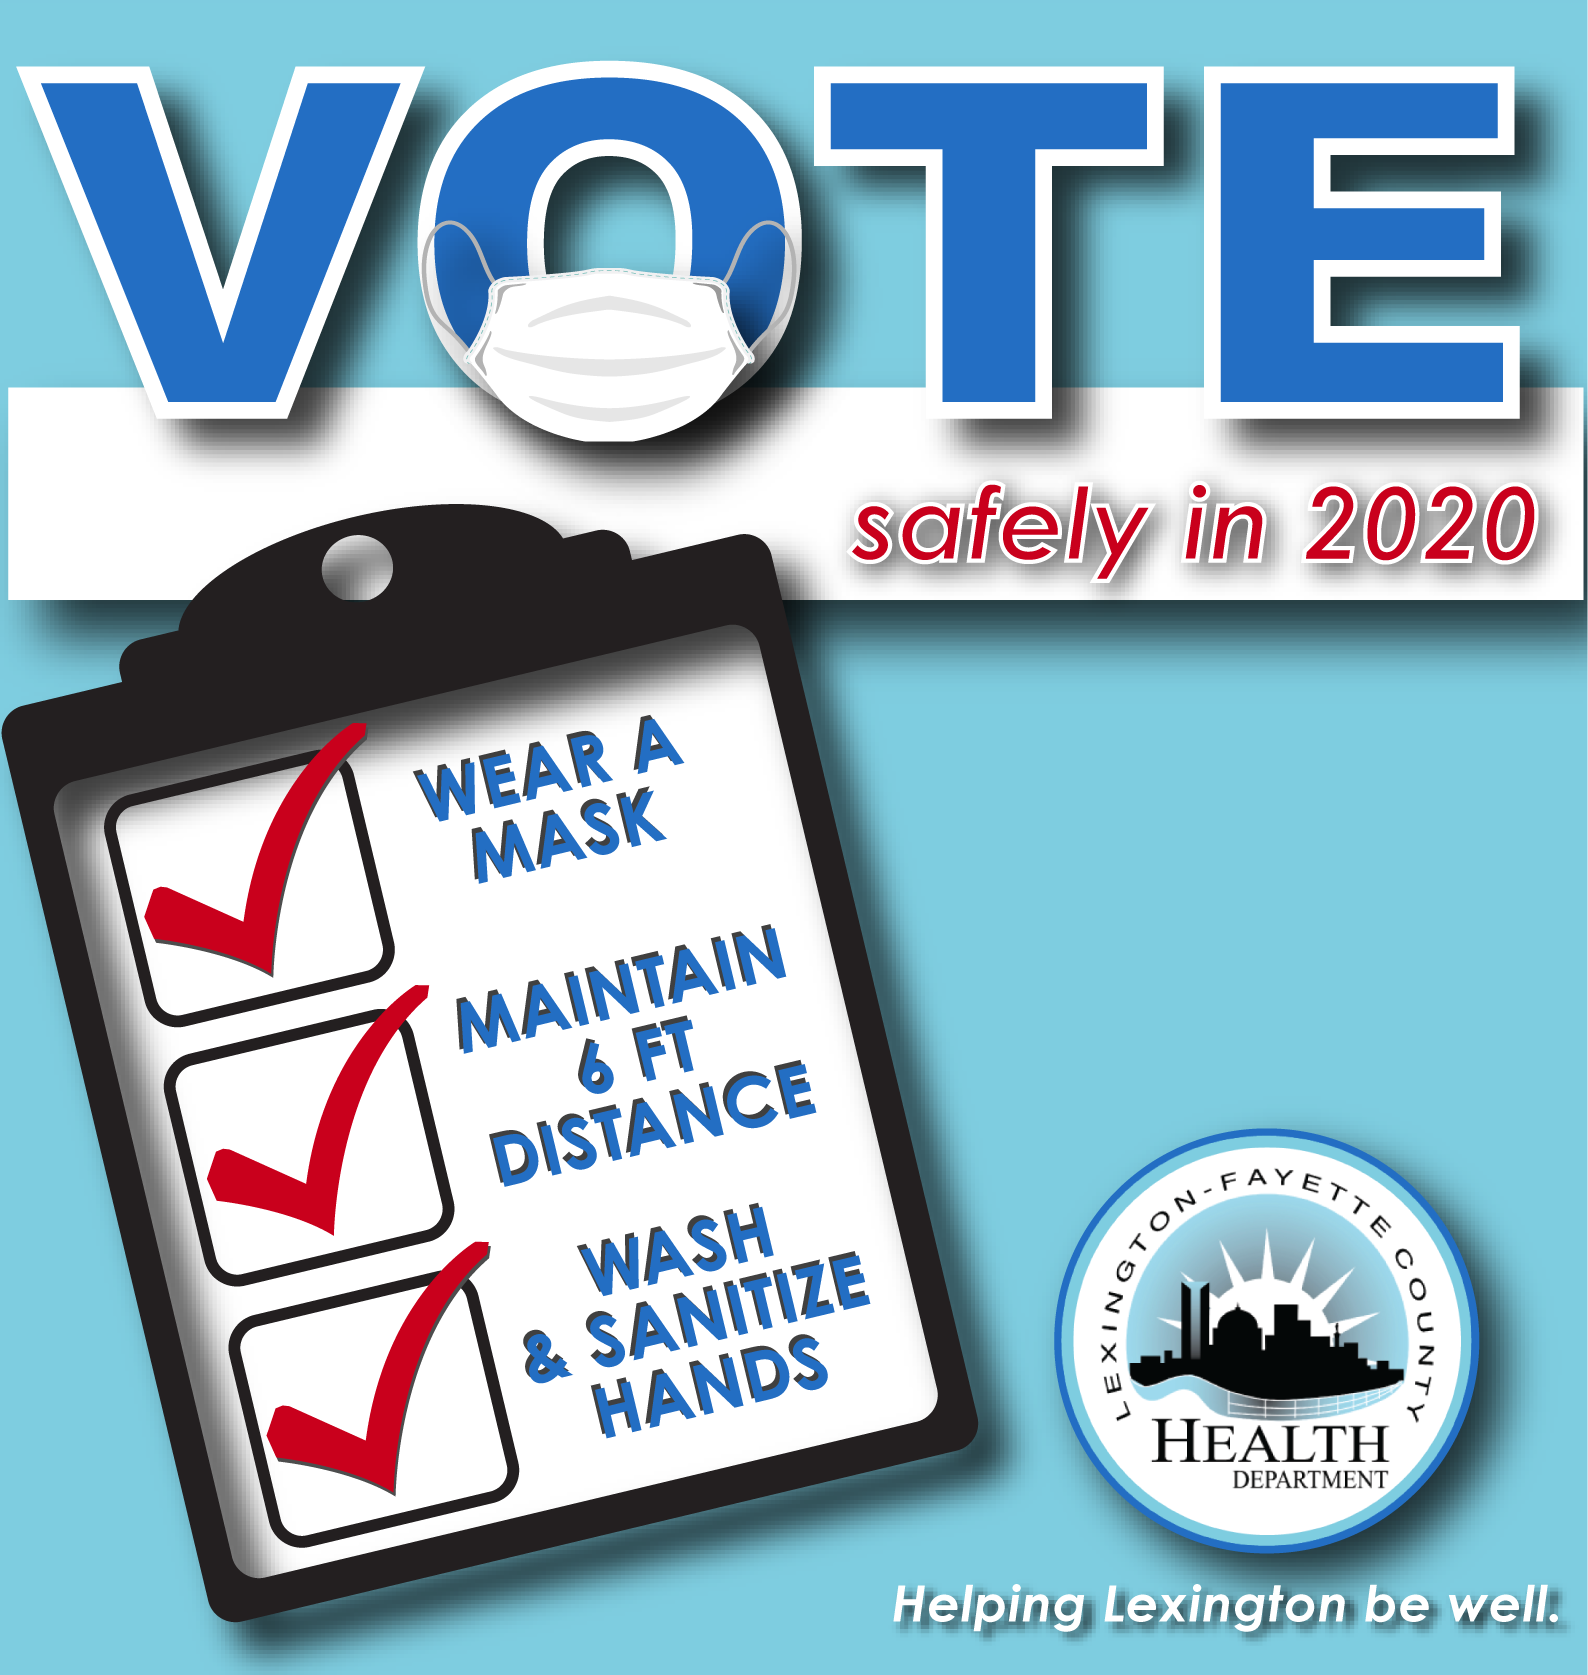 Tips for voting safely during the COVID-19 pandemic